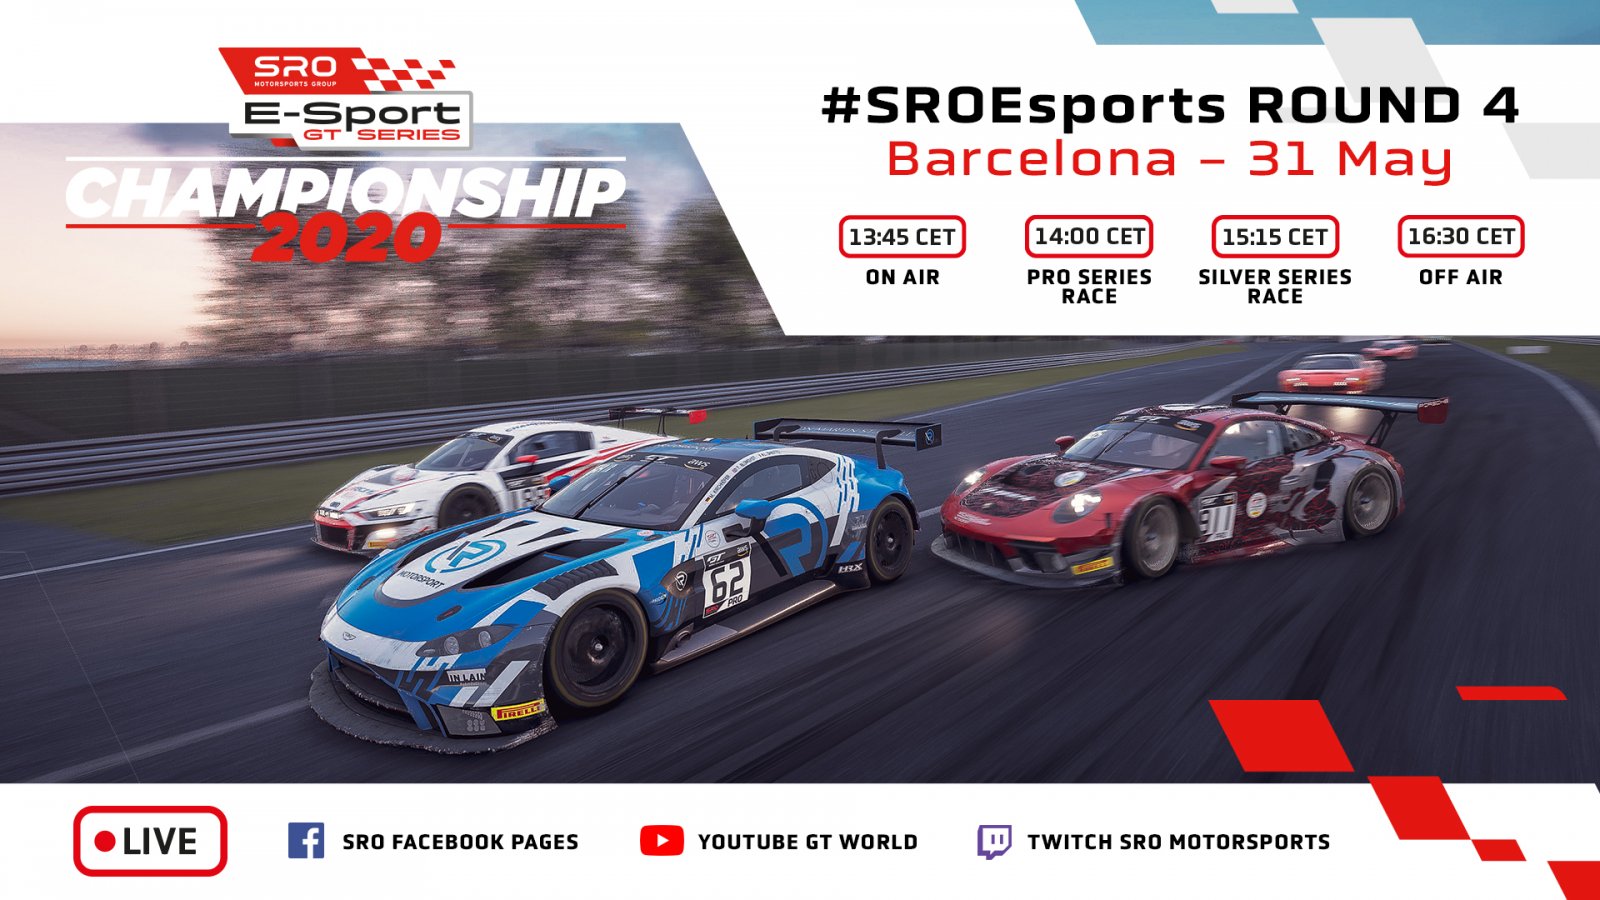 Action-packed weekend in store as SRO E-Sport GT Series enters crucial phase